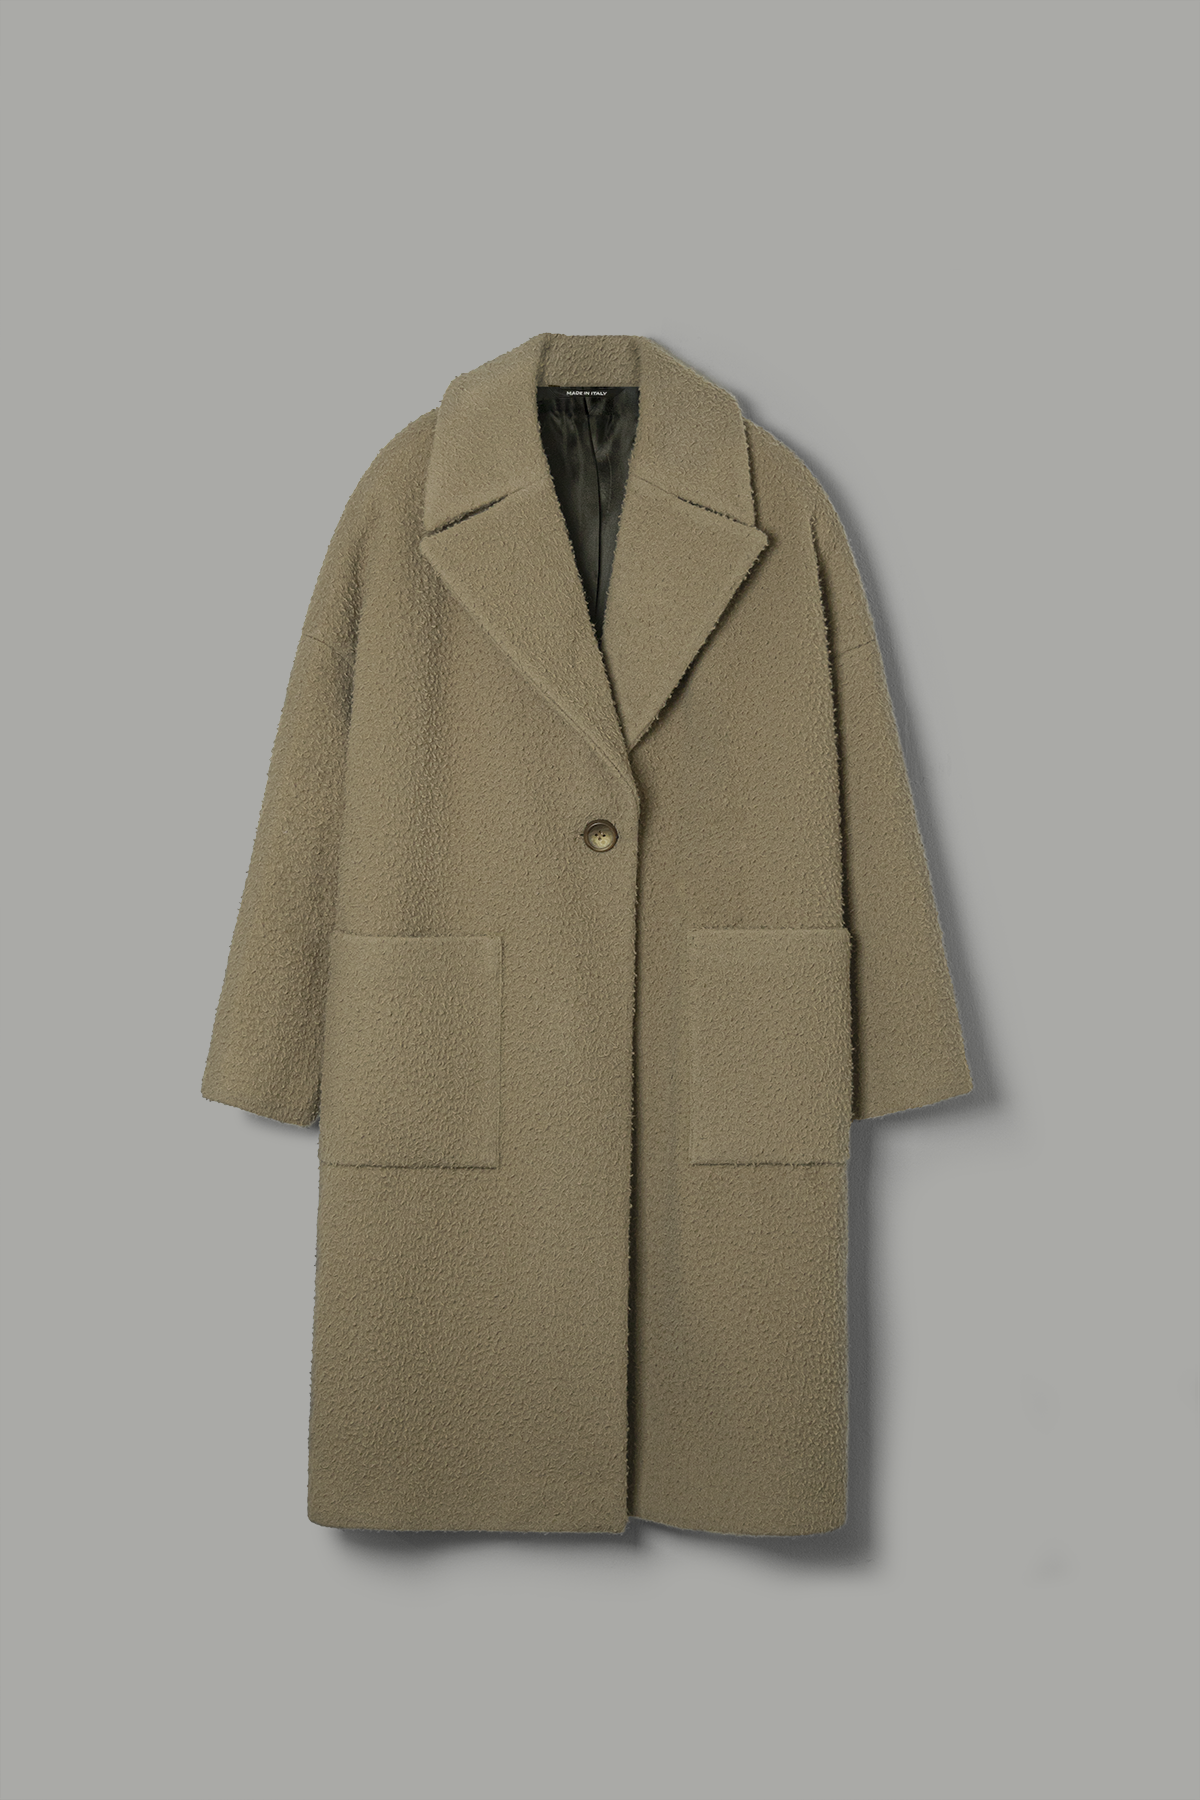 Numero 137: Bow Coat By Casentino (Deep Beige)